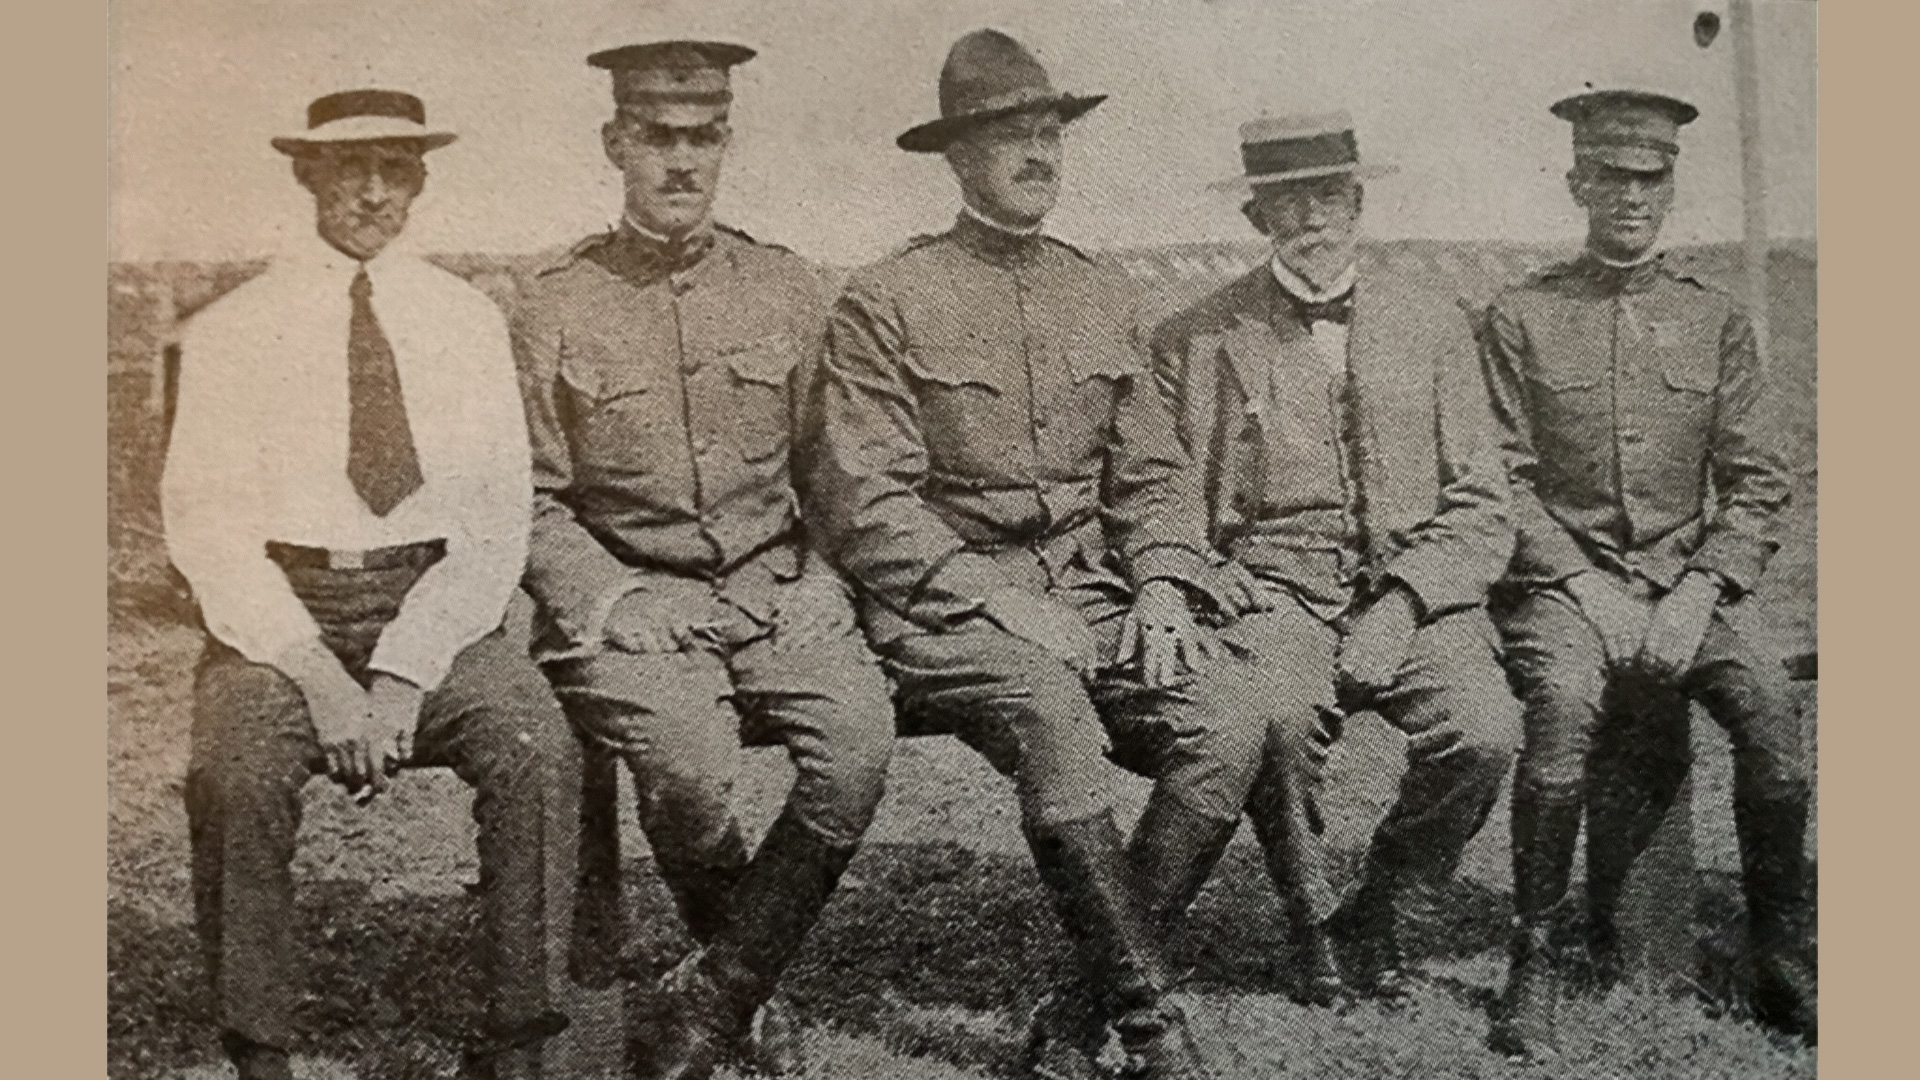 1919 Small Arms Board Members